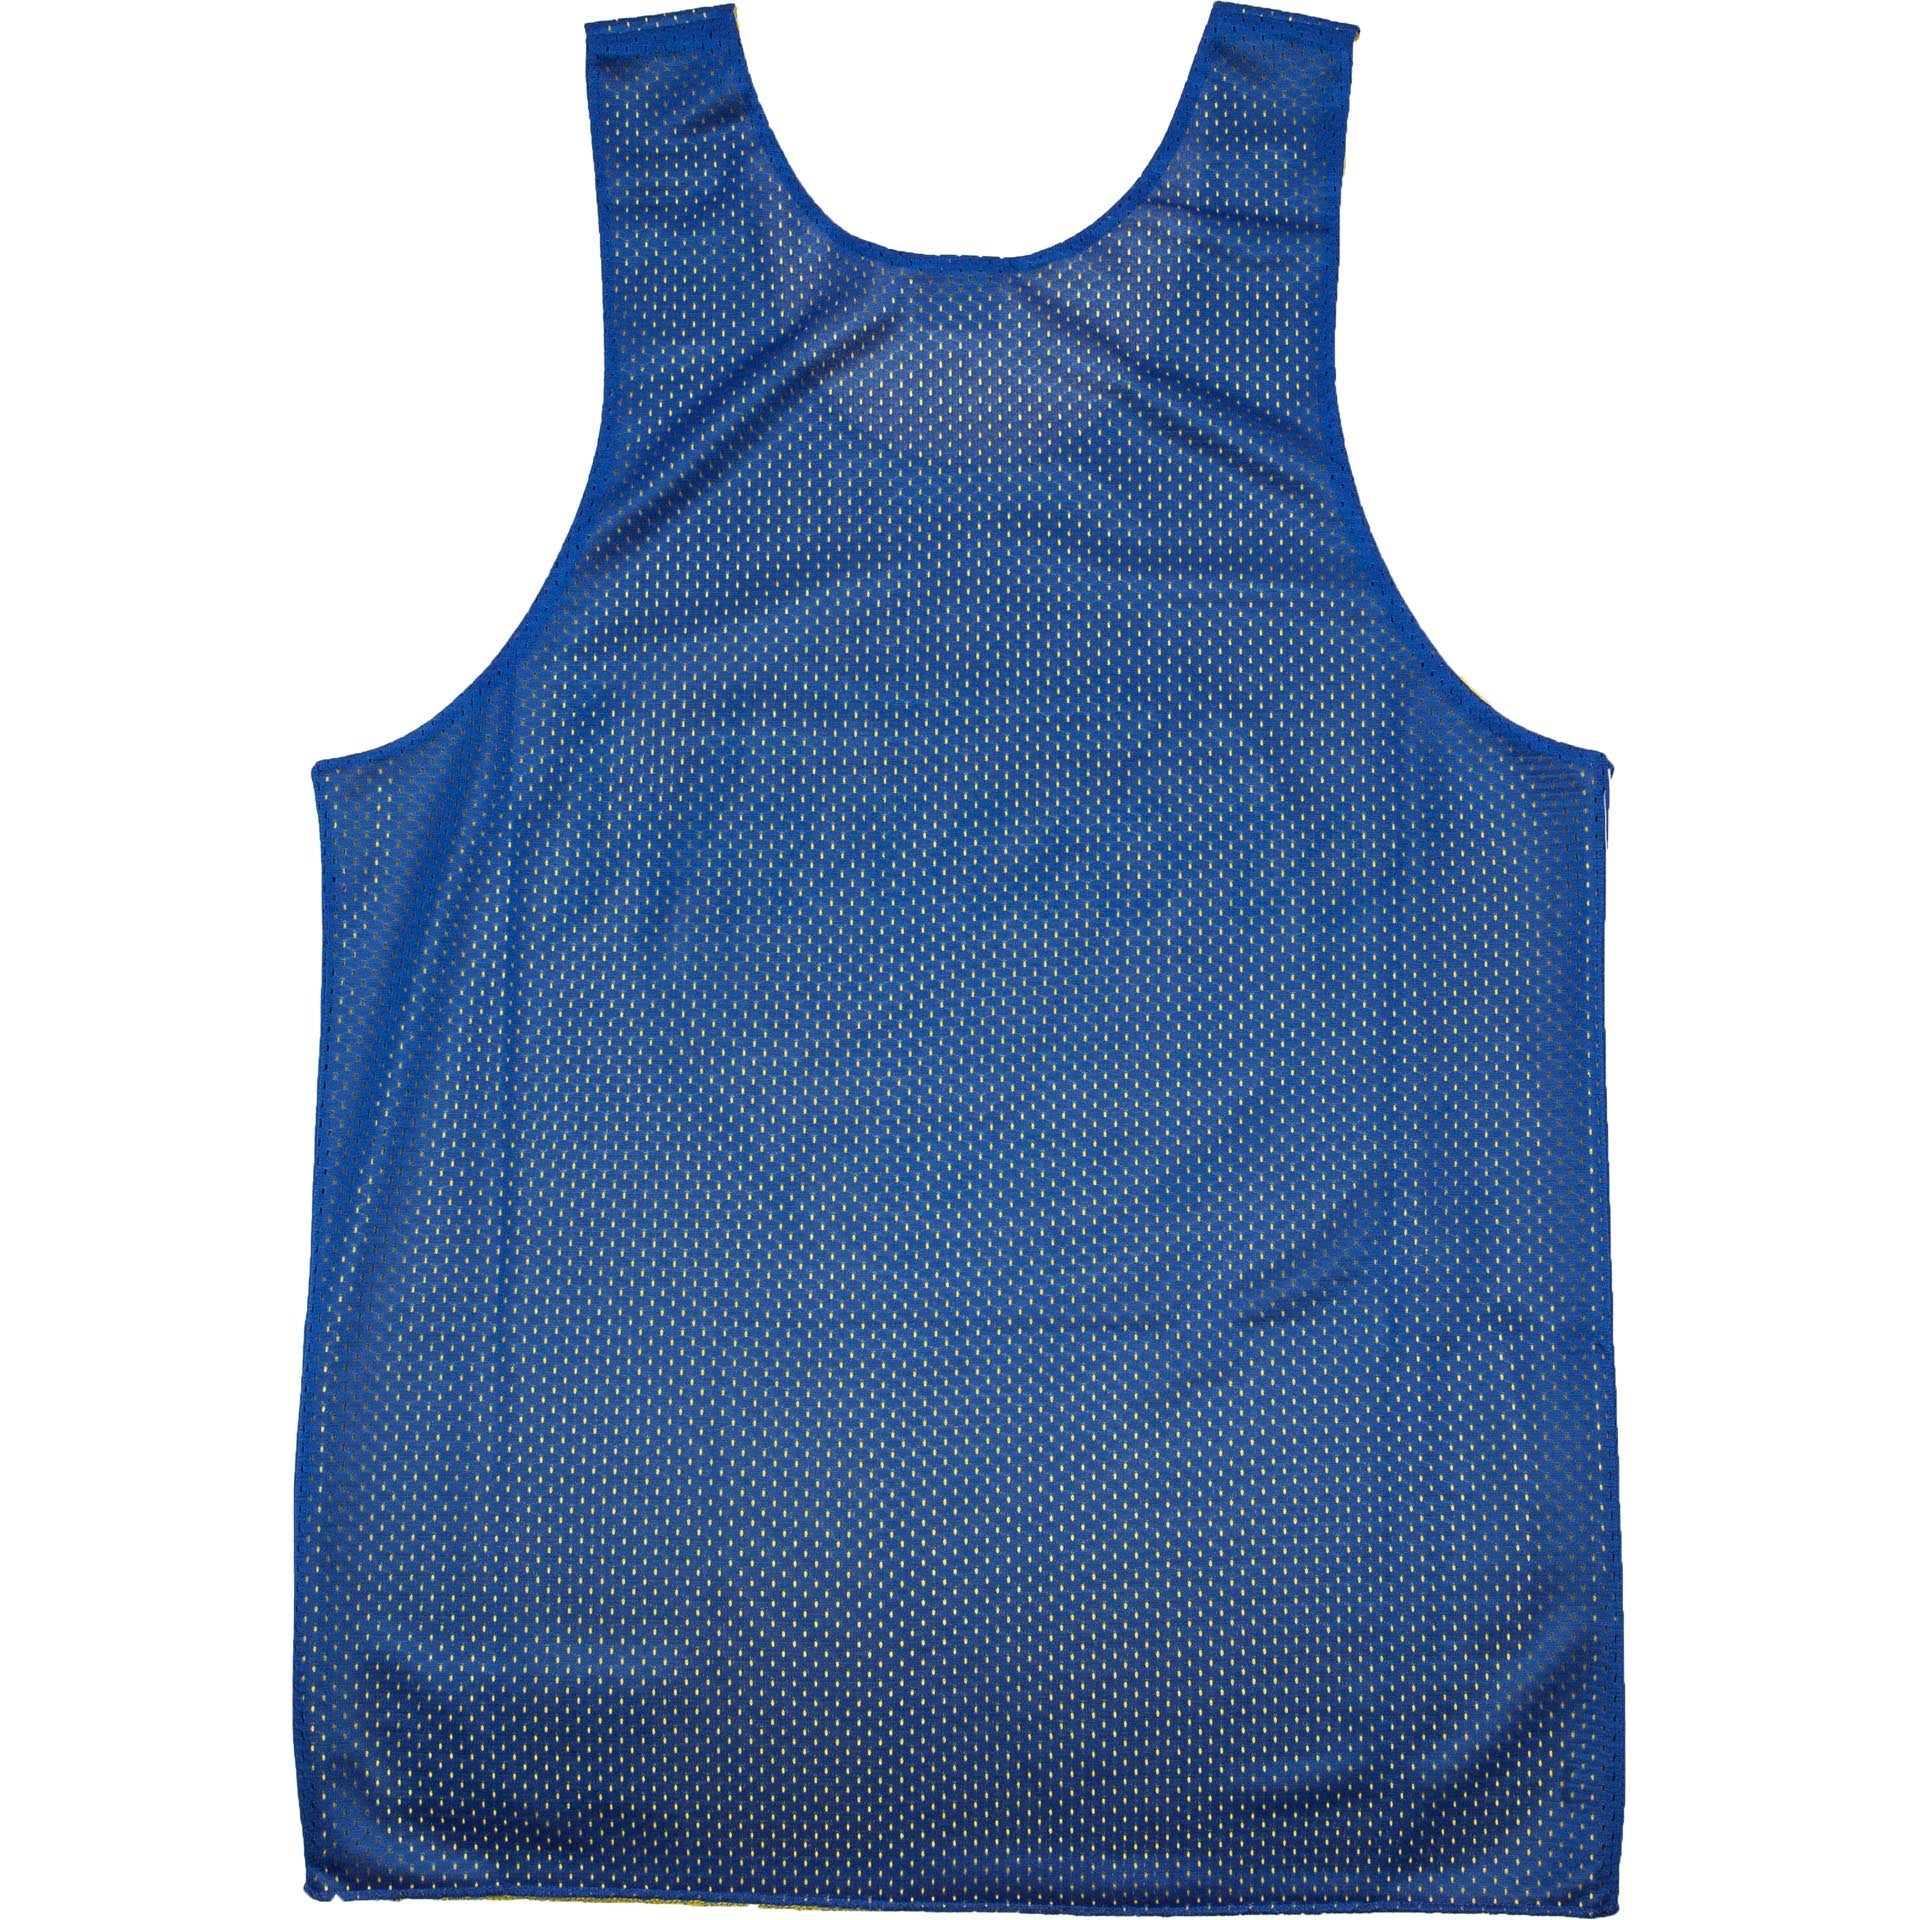  Russell Athletic Legacy Basketball Jersey - Men's 156648-M